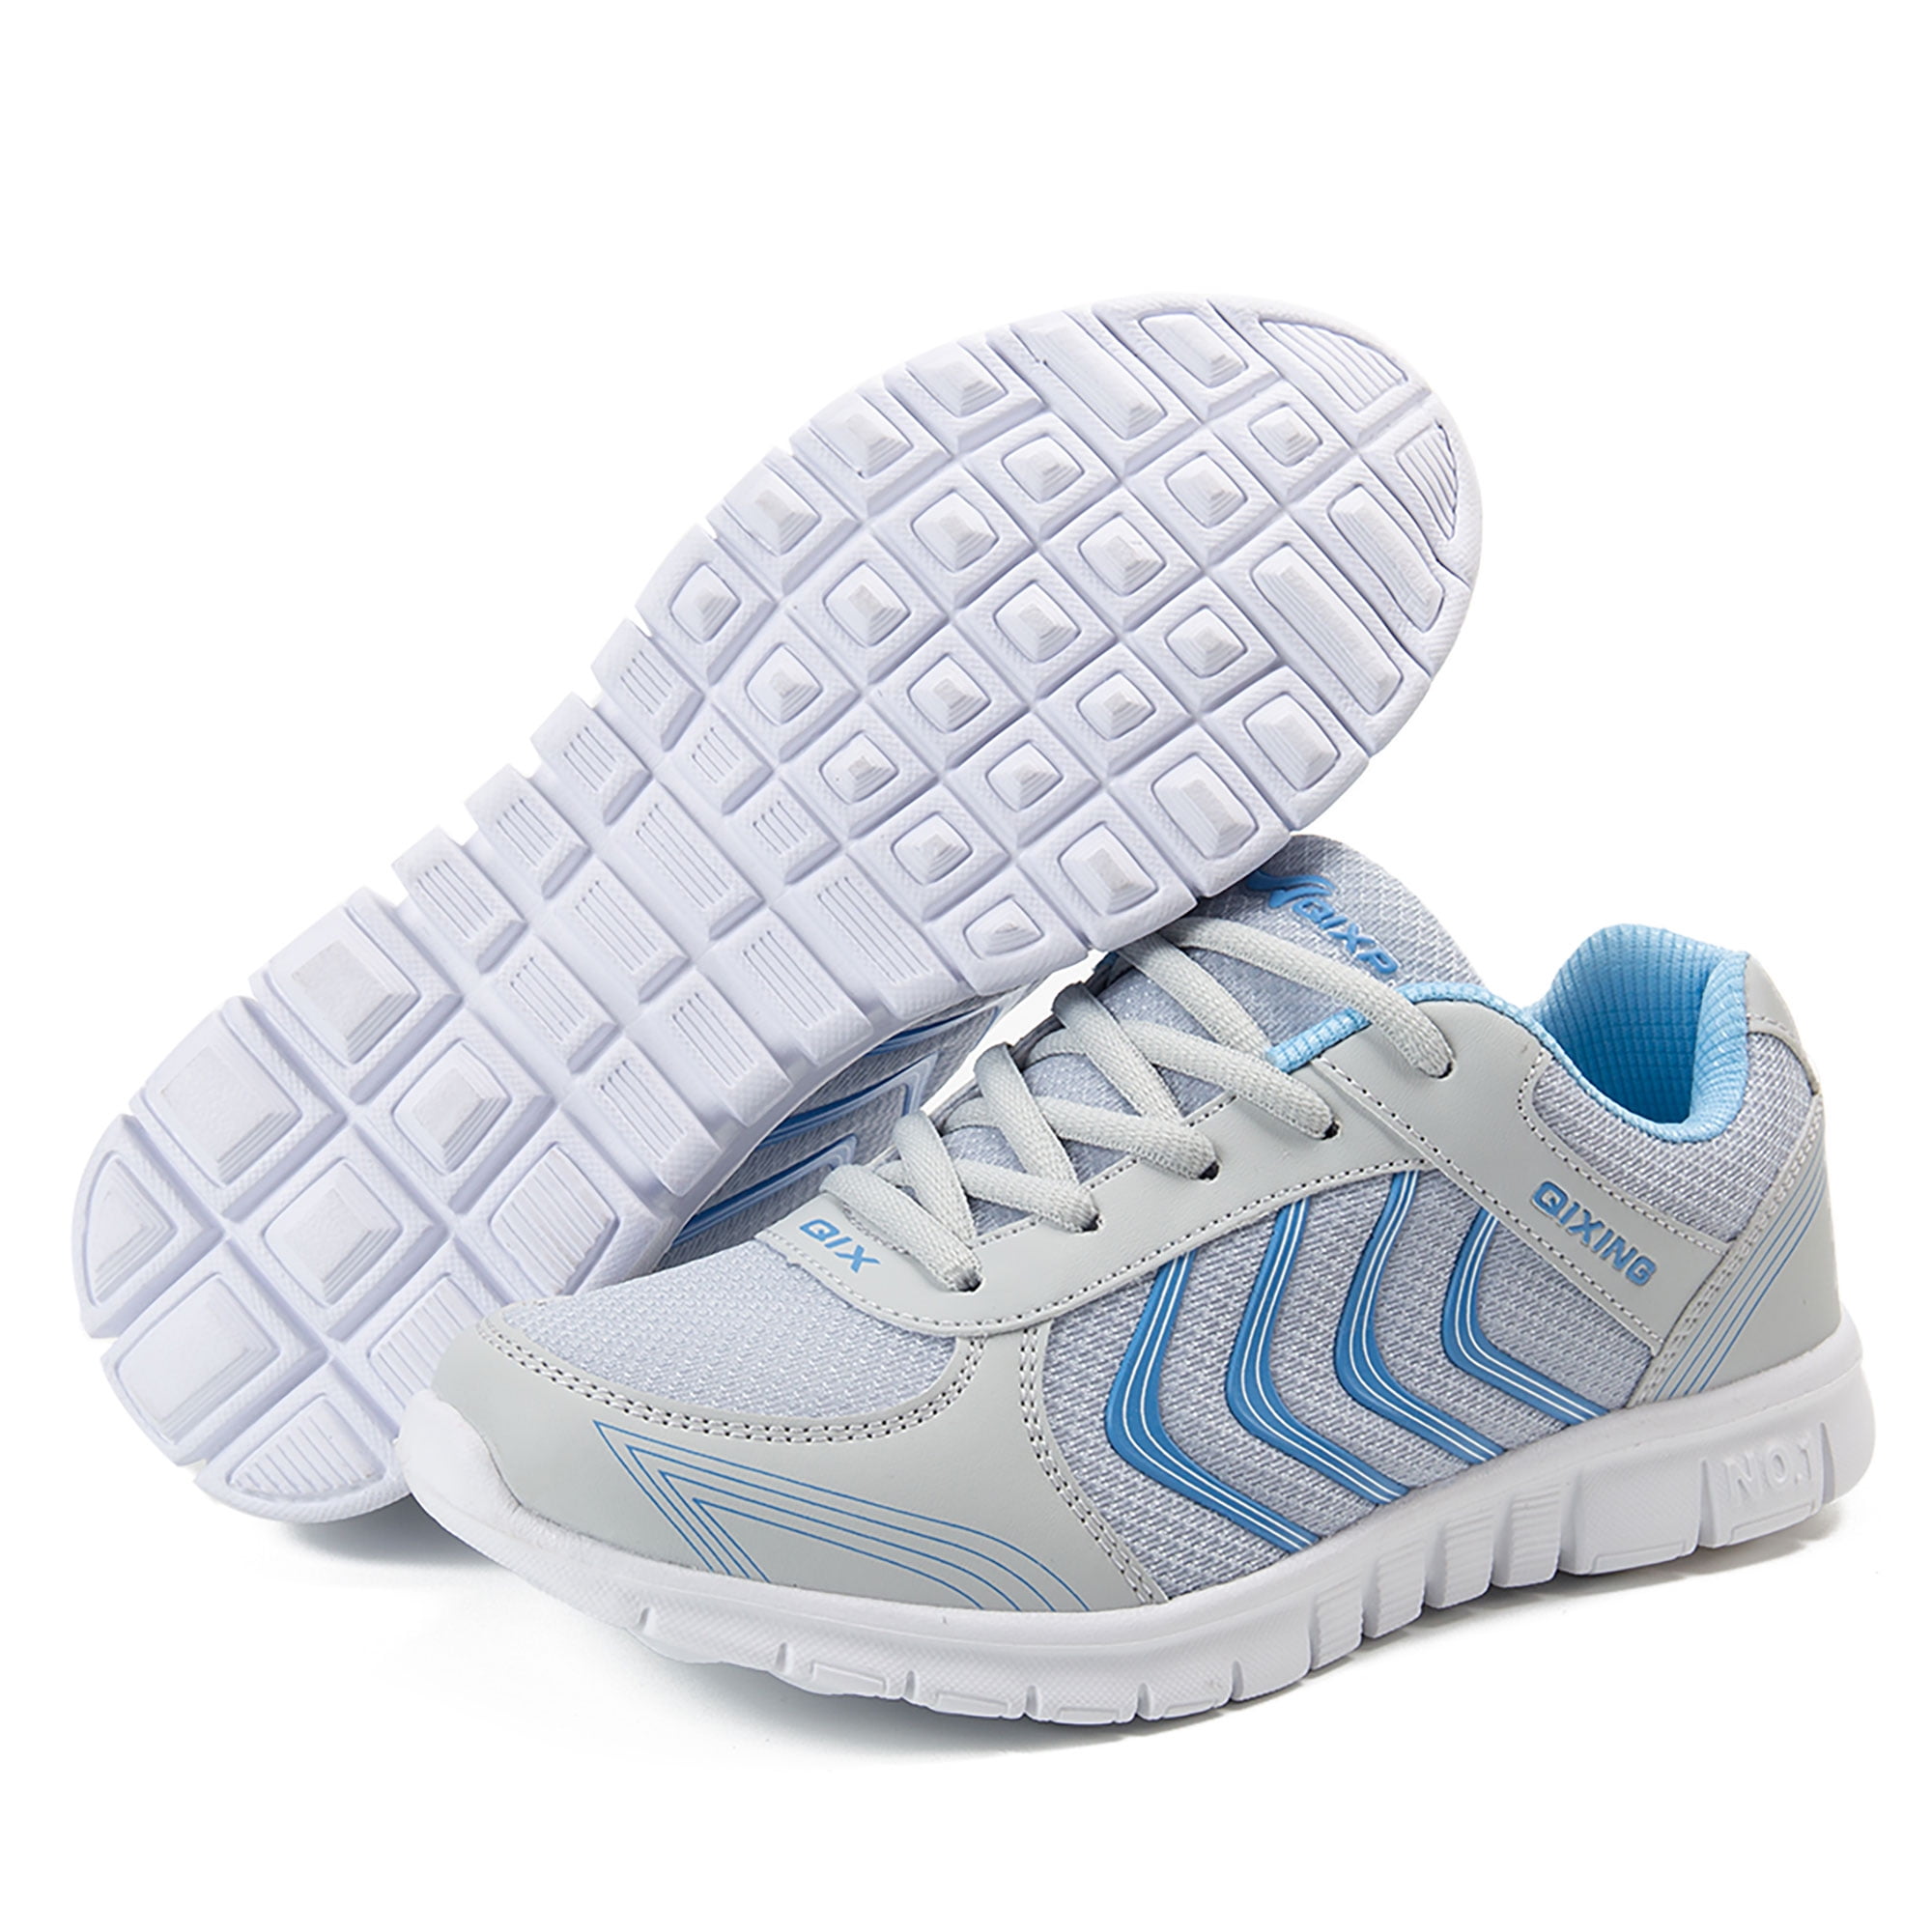 Women's Breathable Lightweight Sneakers Casual Walking Shoes Mesh Running Tennis